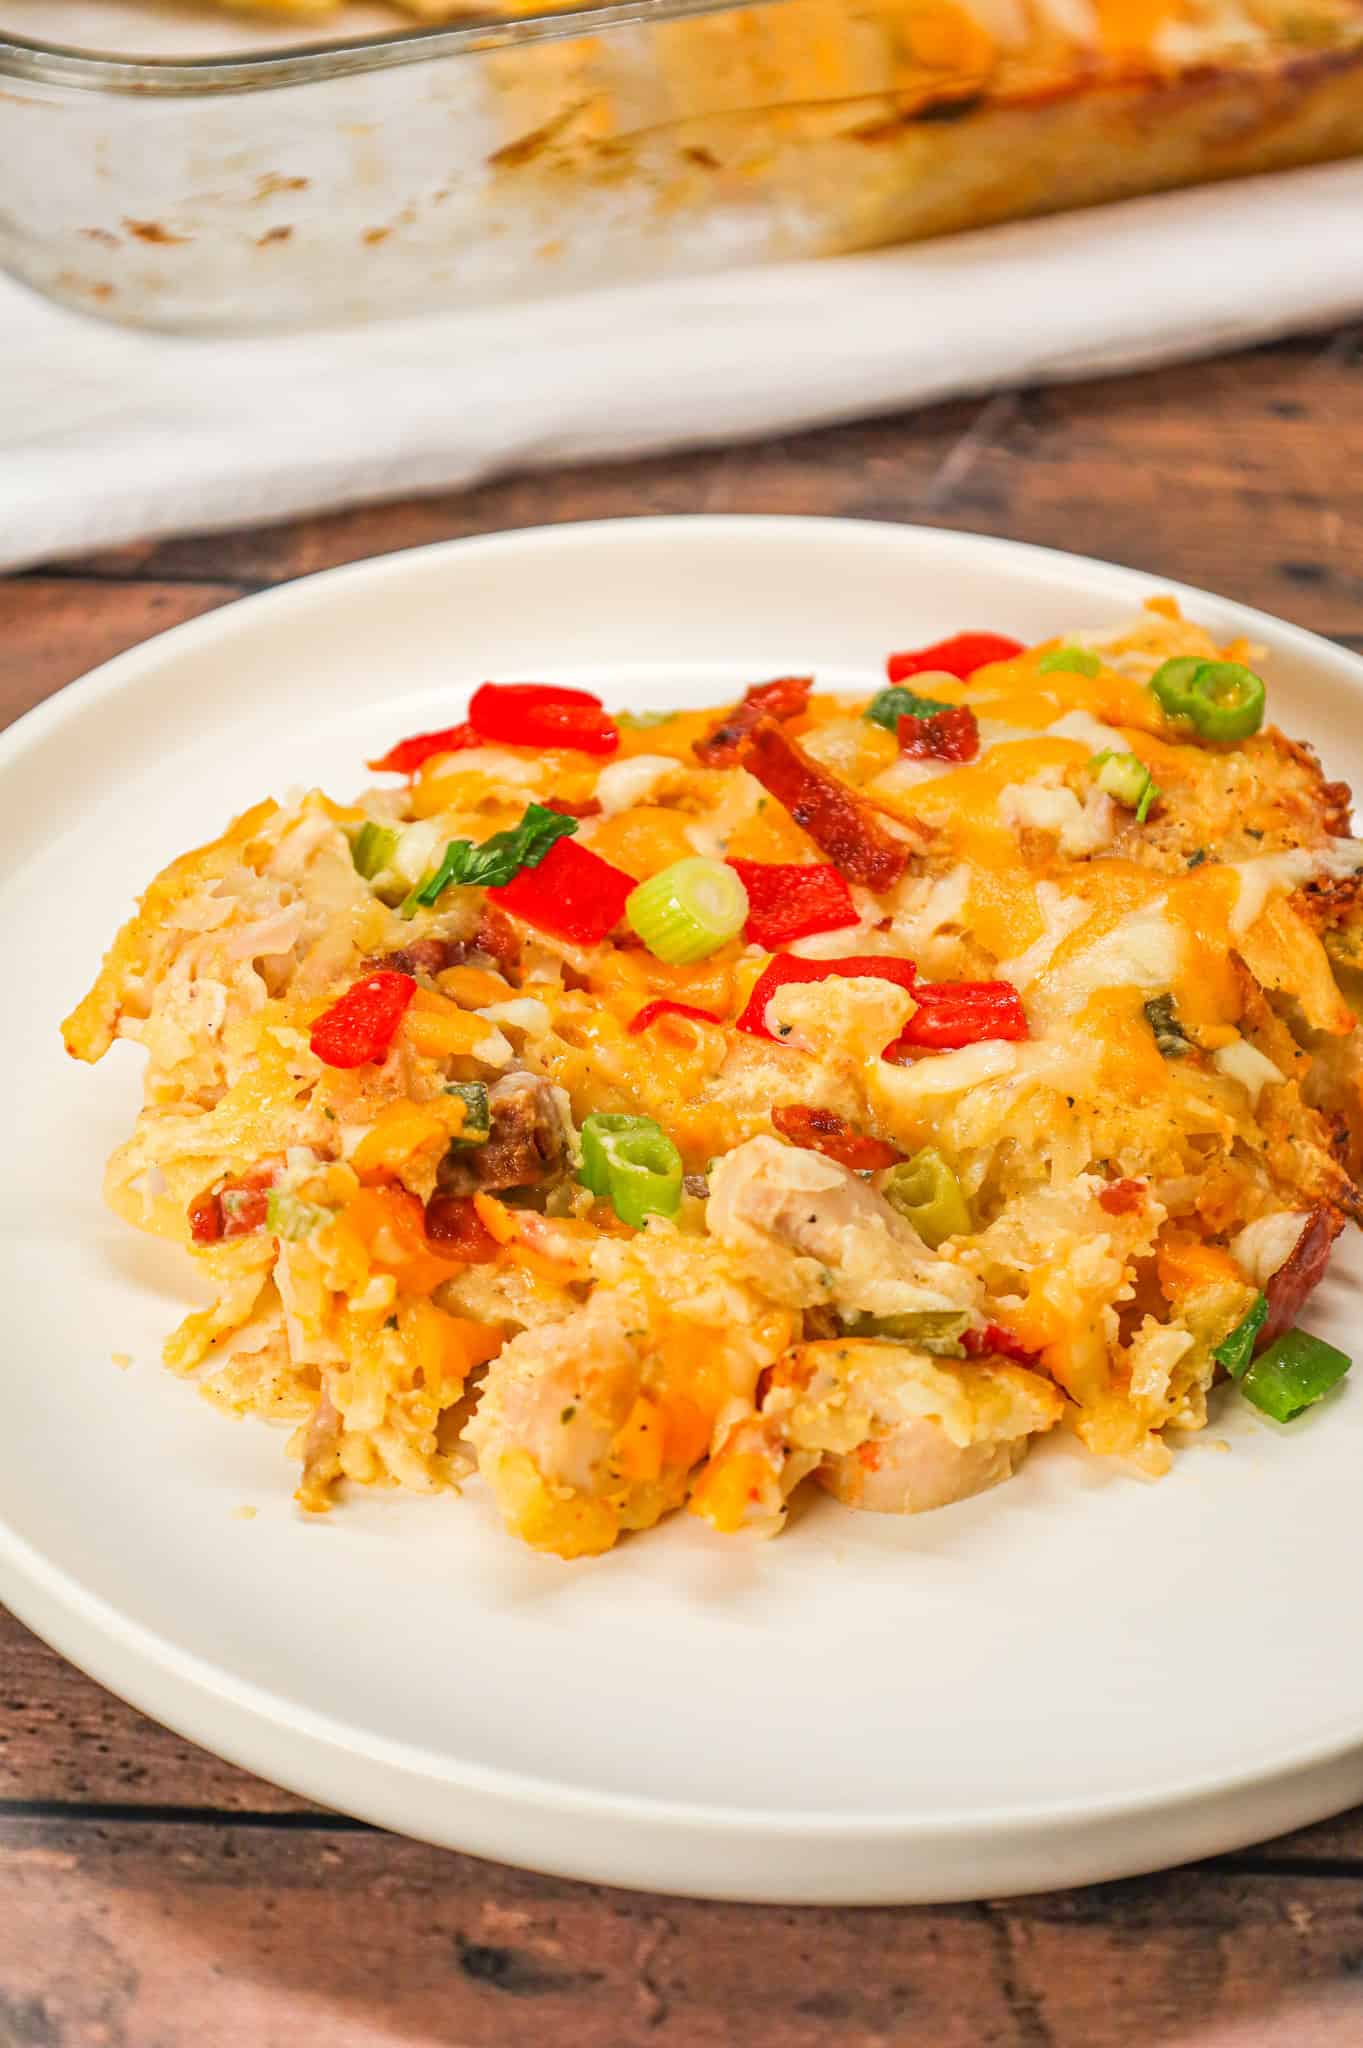 Chicken Hashbrown Casserole is a hearty dish made with shredded potatoes, shredded rotisserie chicken, crumbled bacon, roasted red peppers, cheddar cheese, ranch dressing mix, sour cream and cream of chicken soup.